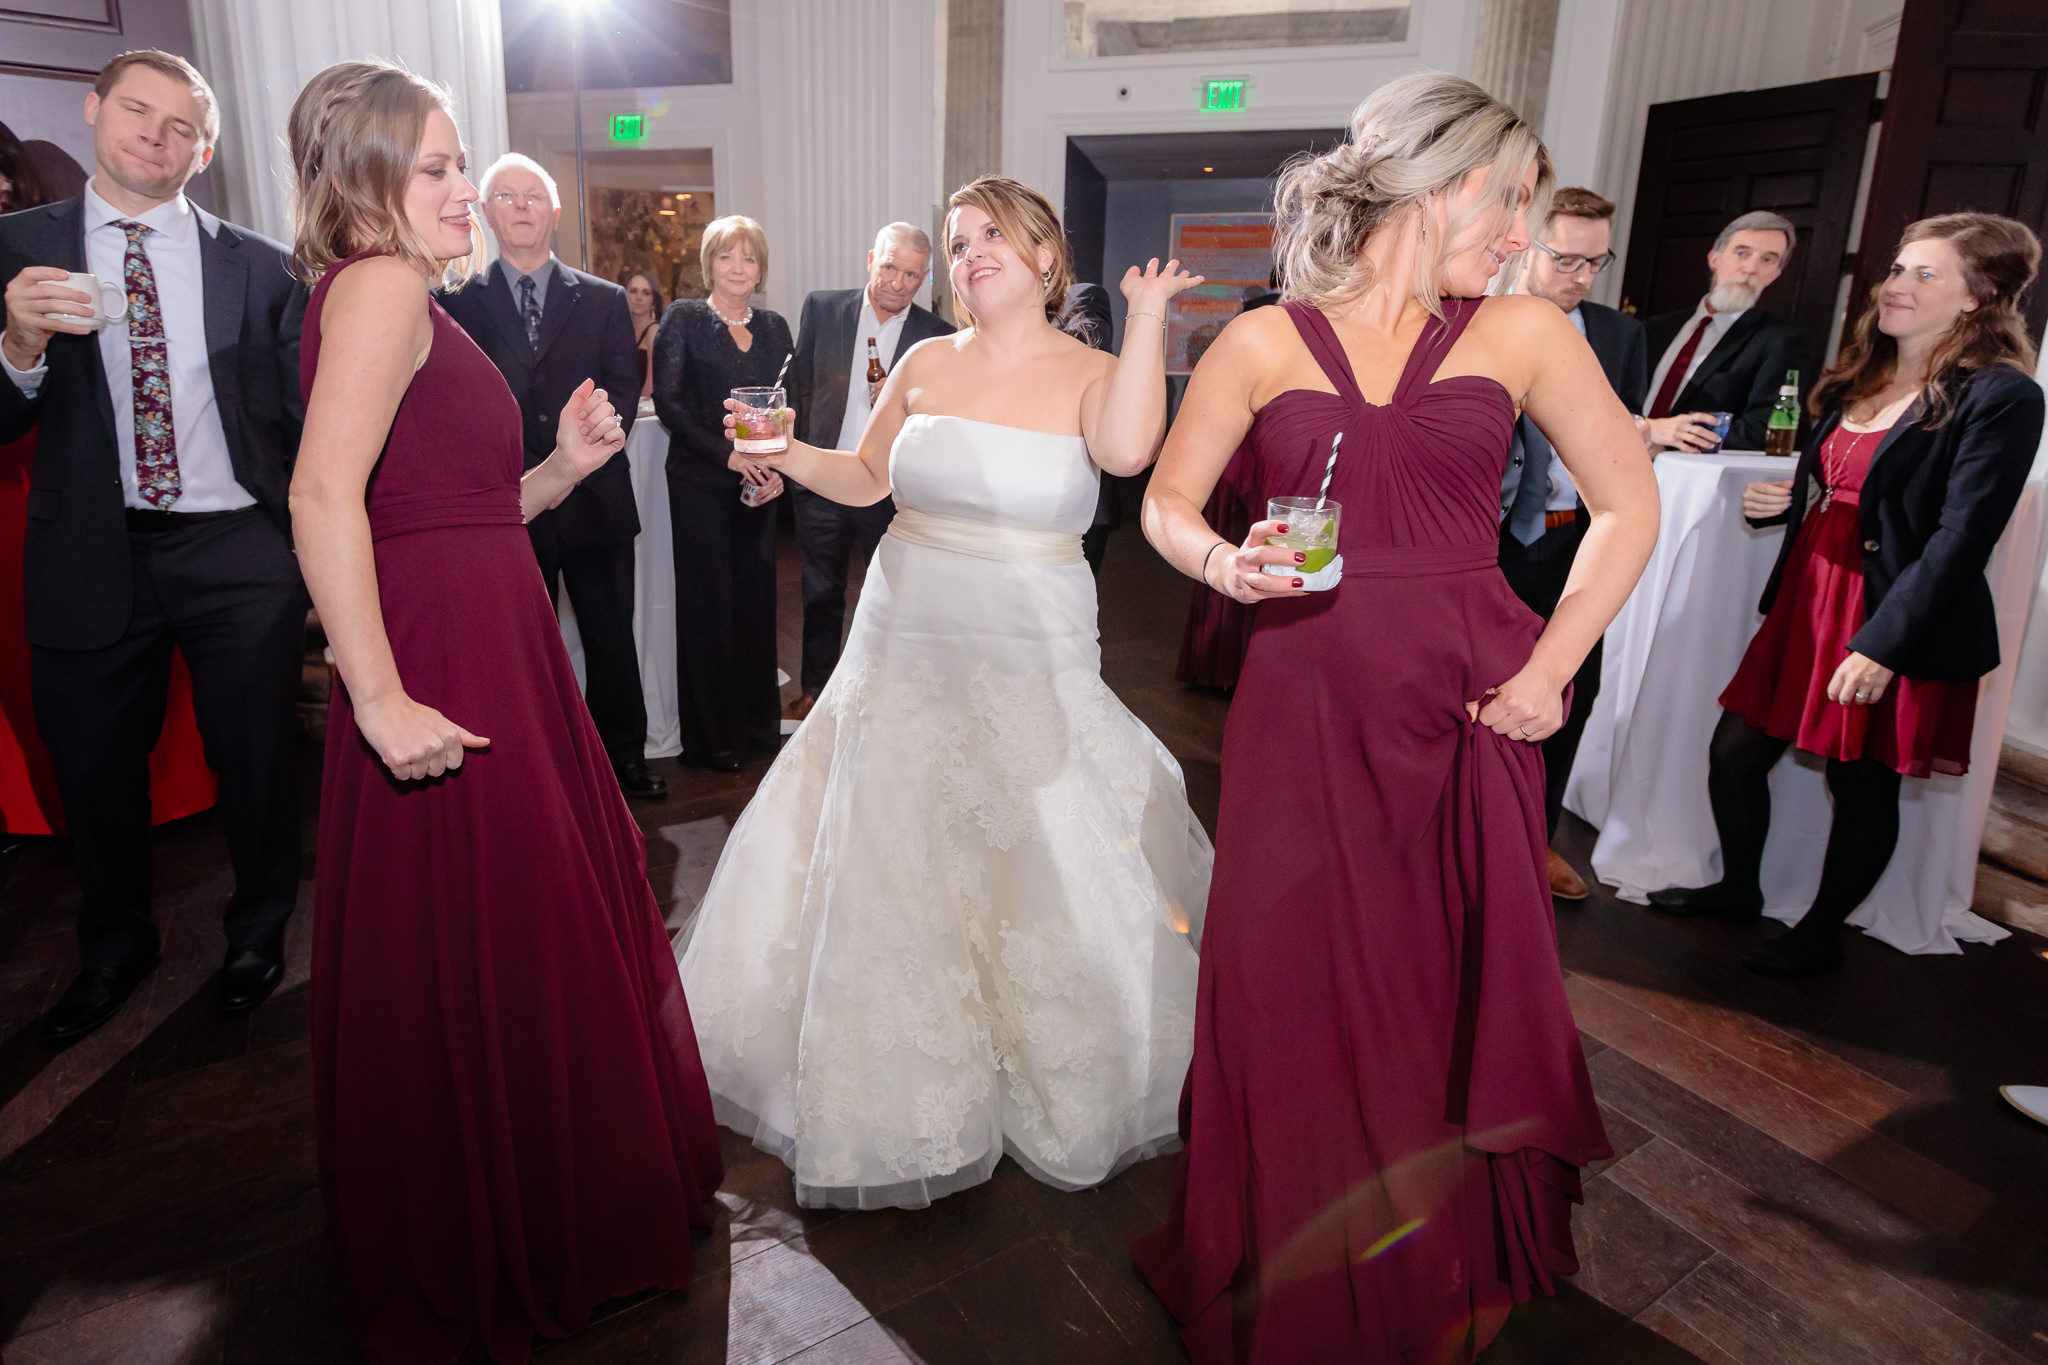 Bride dances with her bridesmaids at Pittsburgh's Hotel Monaco